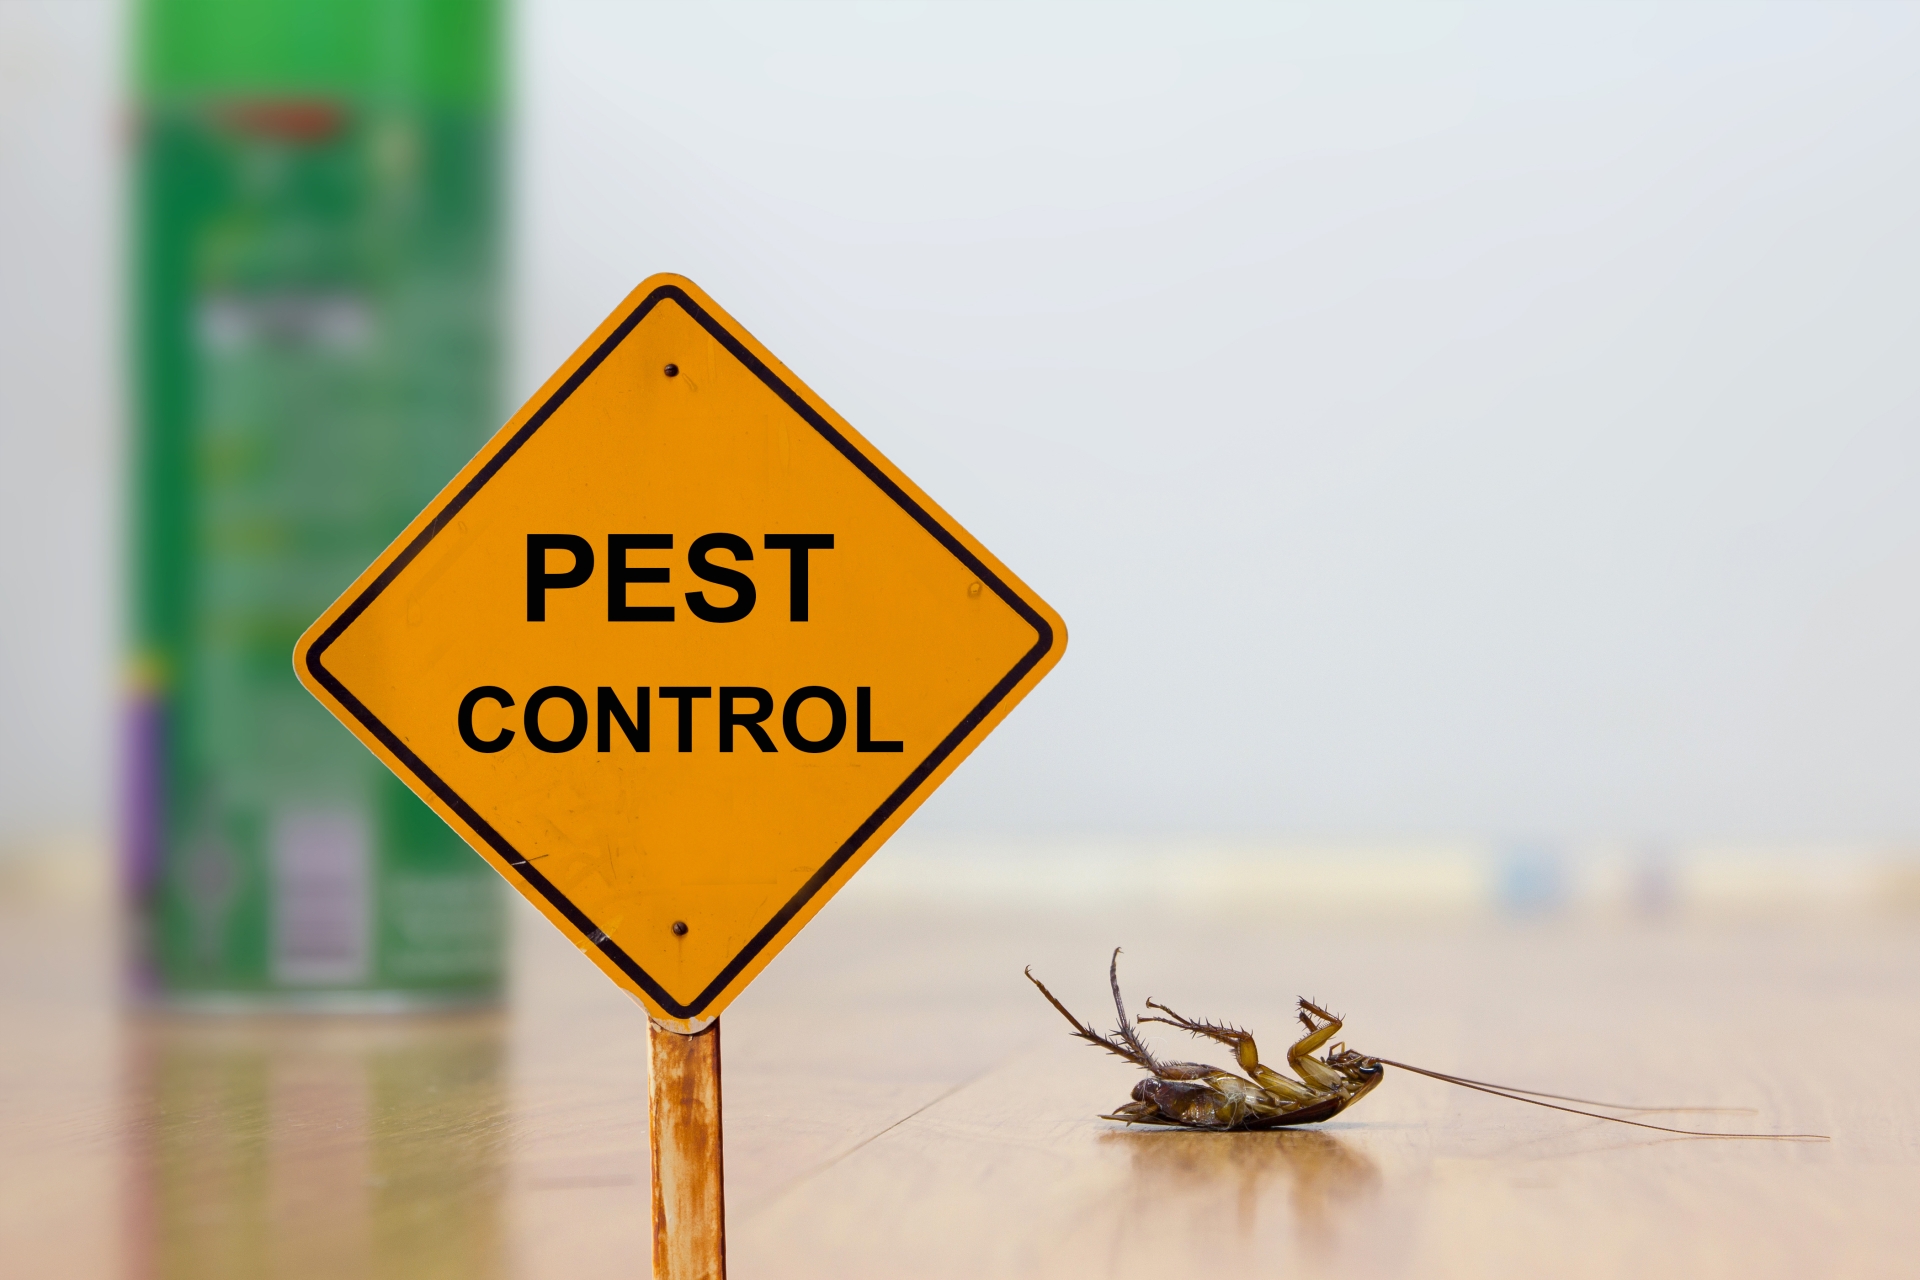 24 Hour Pest Control, Pest Control in Notting Hill, W11. Call Now 020 8166 9746